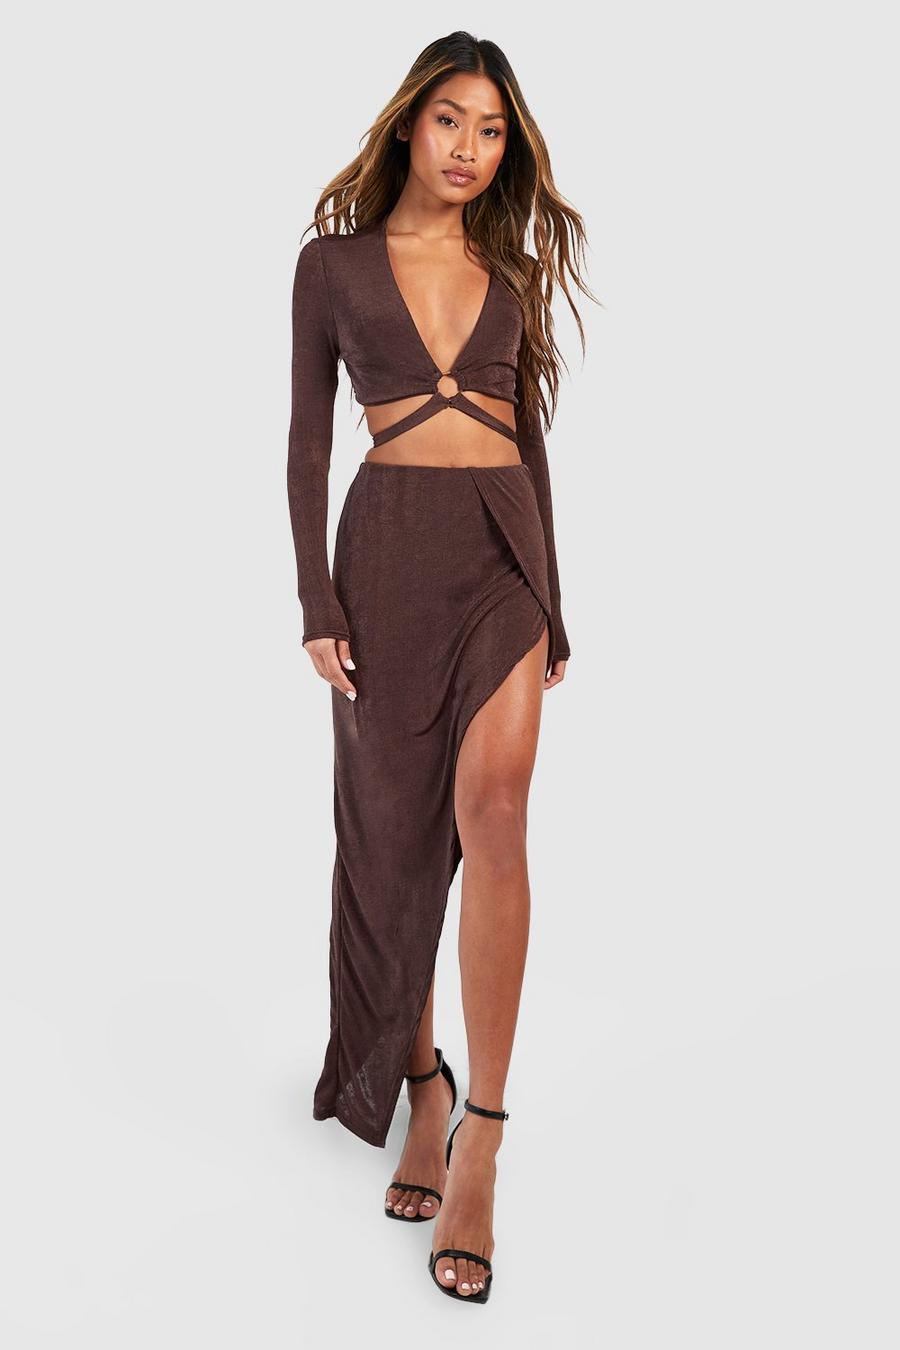 Chocolate Acetate Slinky O Ring Cut Out Top & Maxi Skirt image number 1